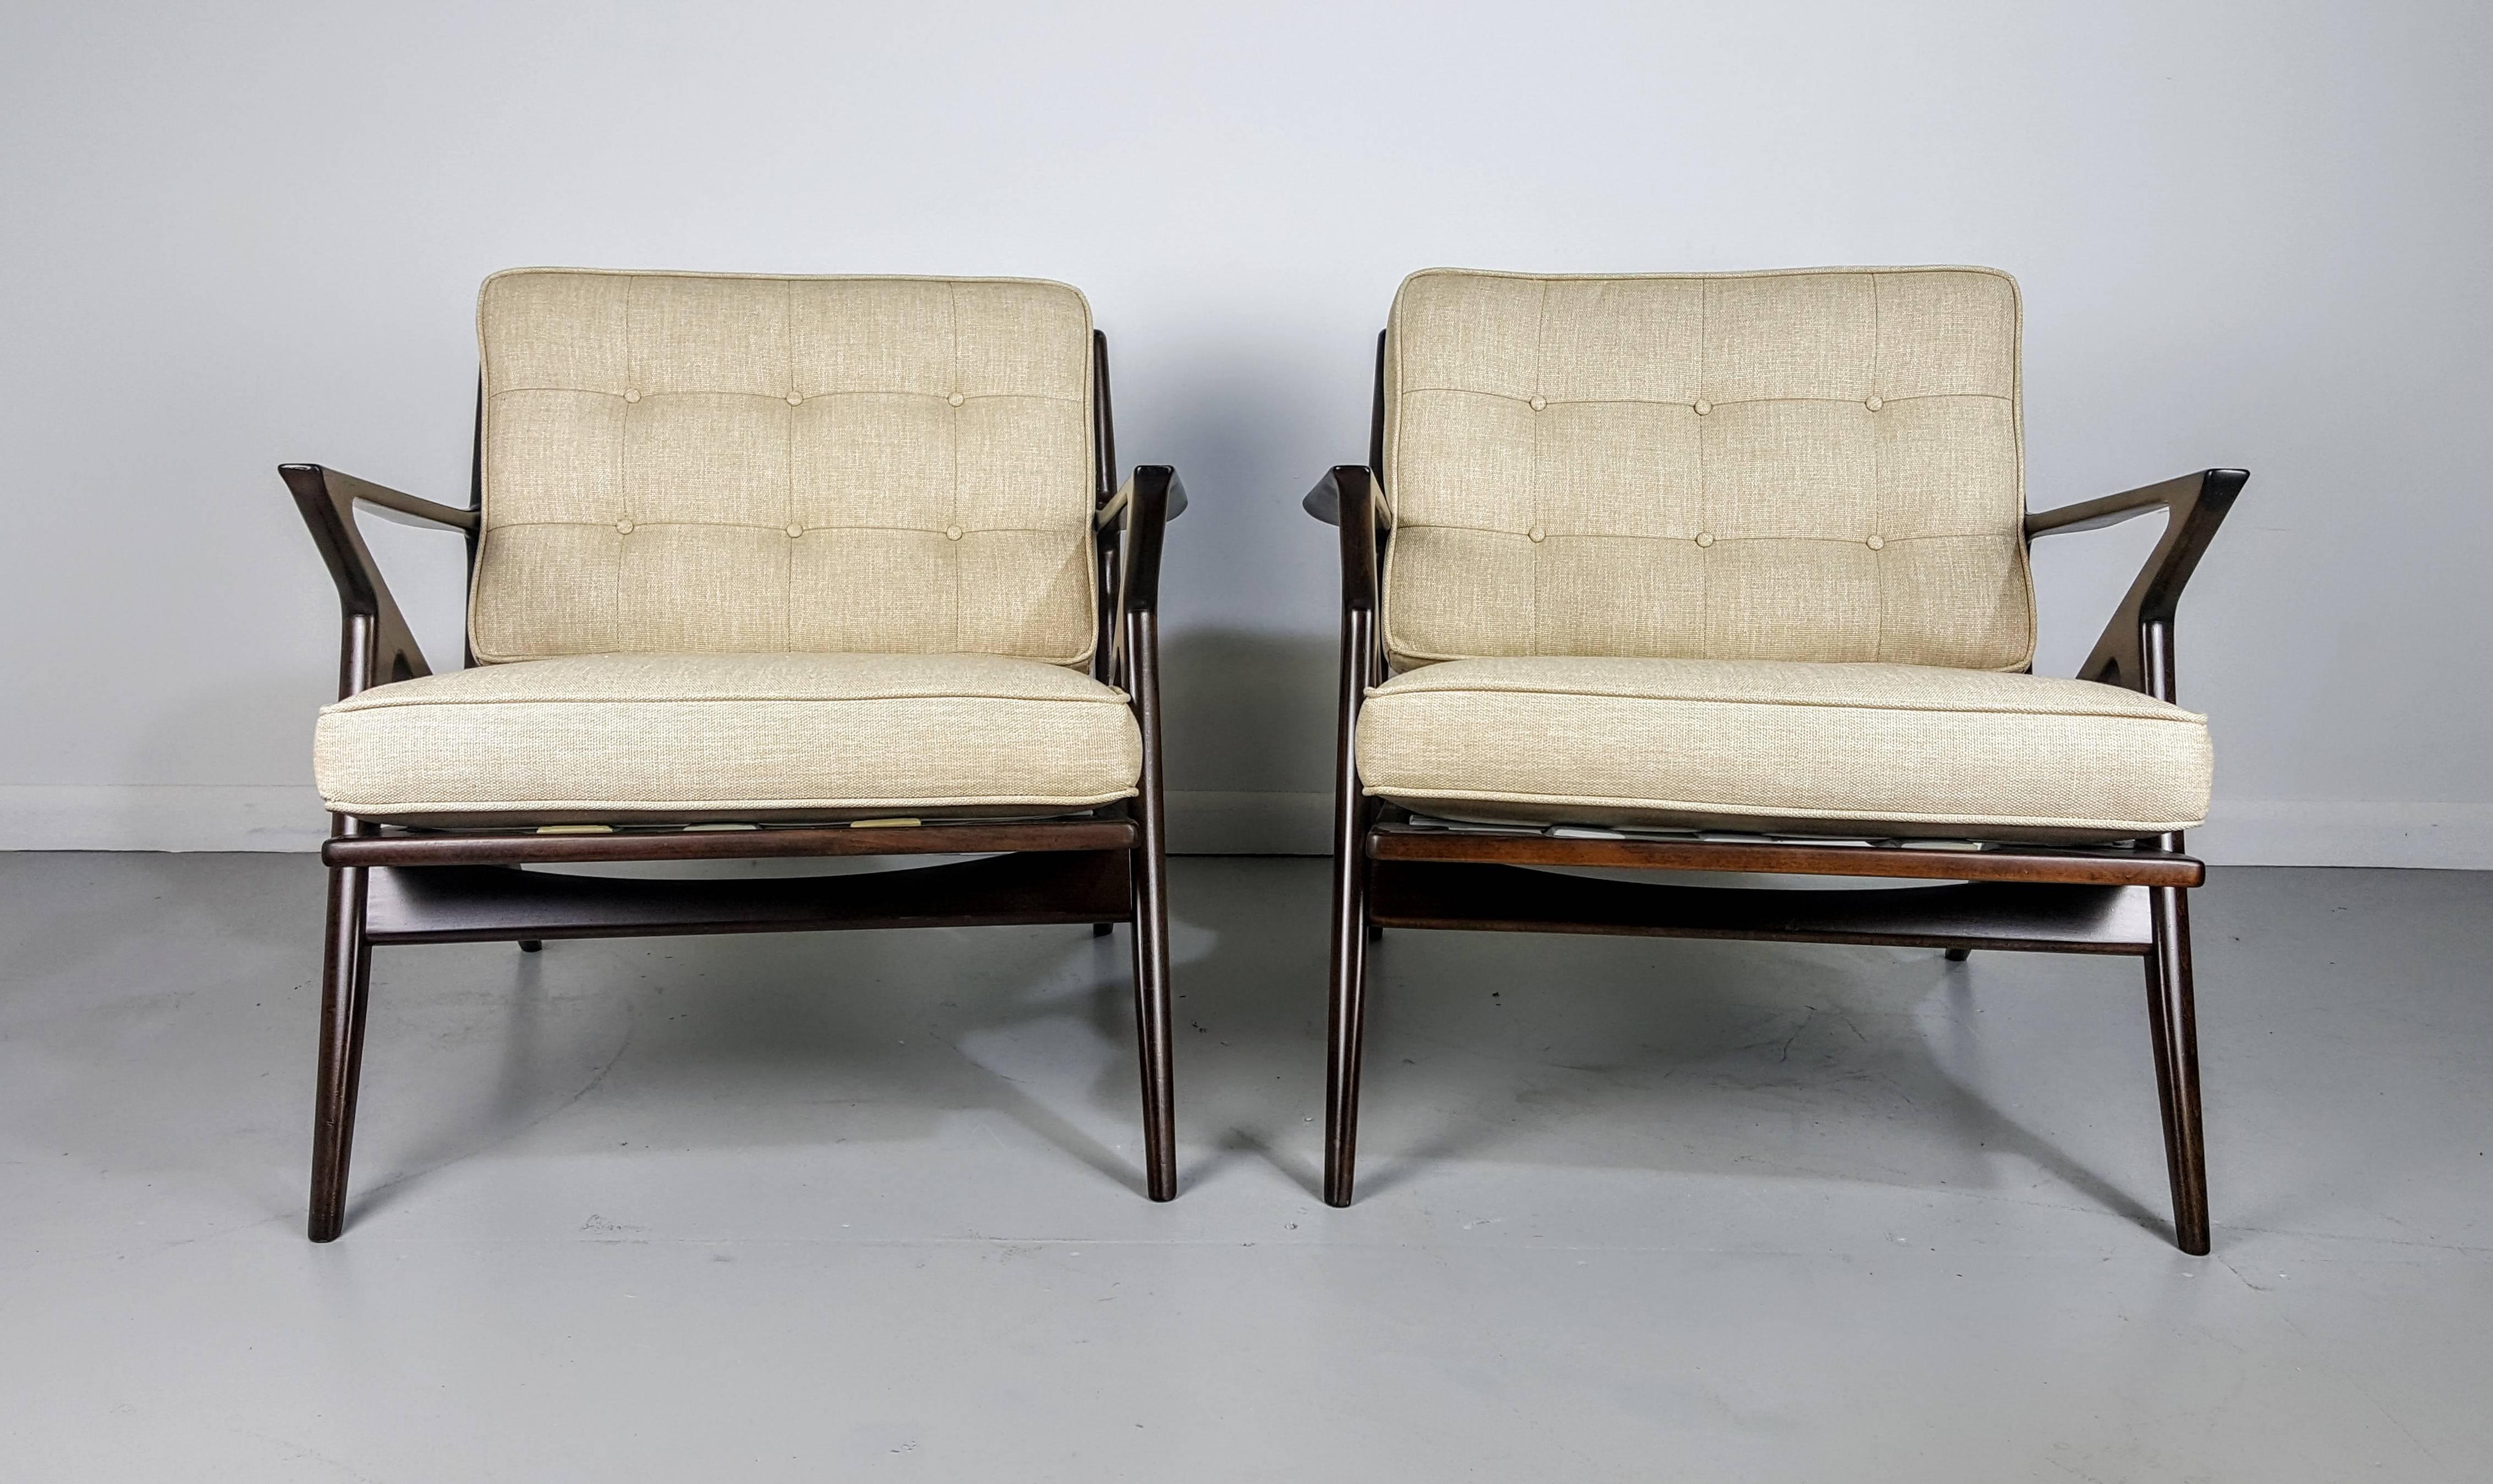 Danish Pair of Sculptural Lounge Chairs by Poul Jensen for Selig, Denmark 1950s